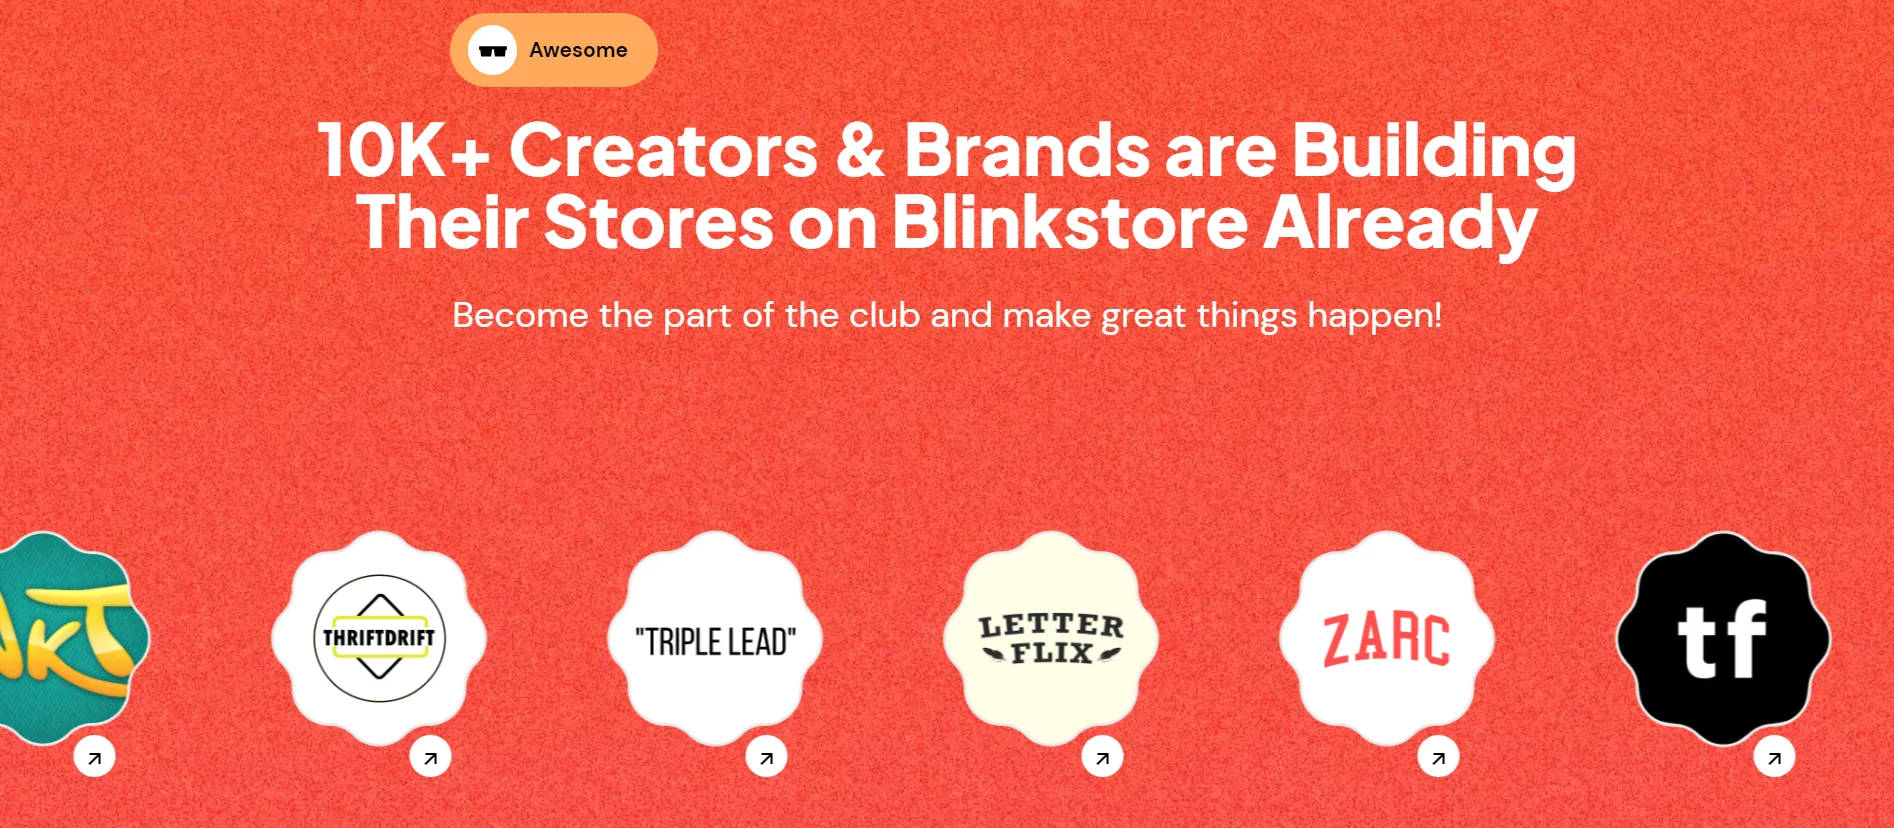 Print on demand with Blinkstore